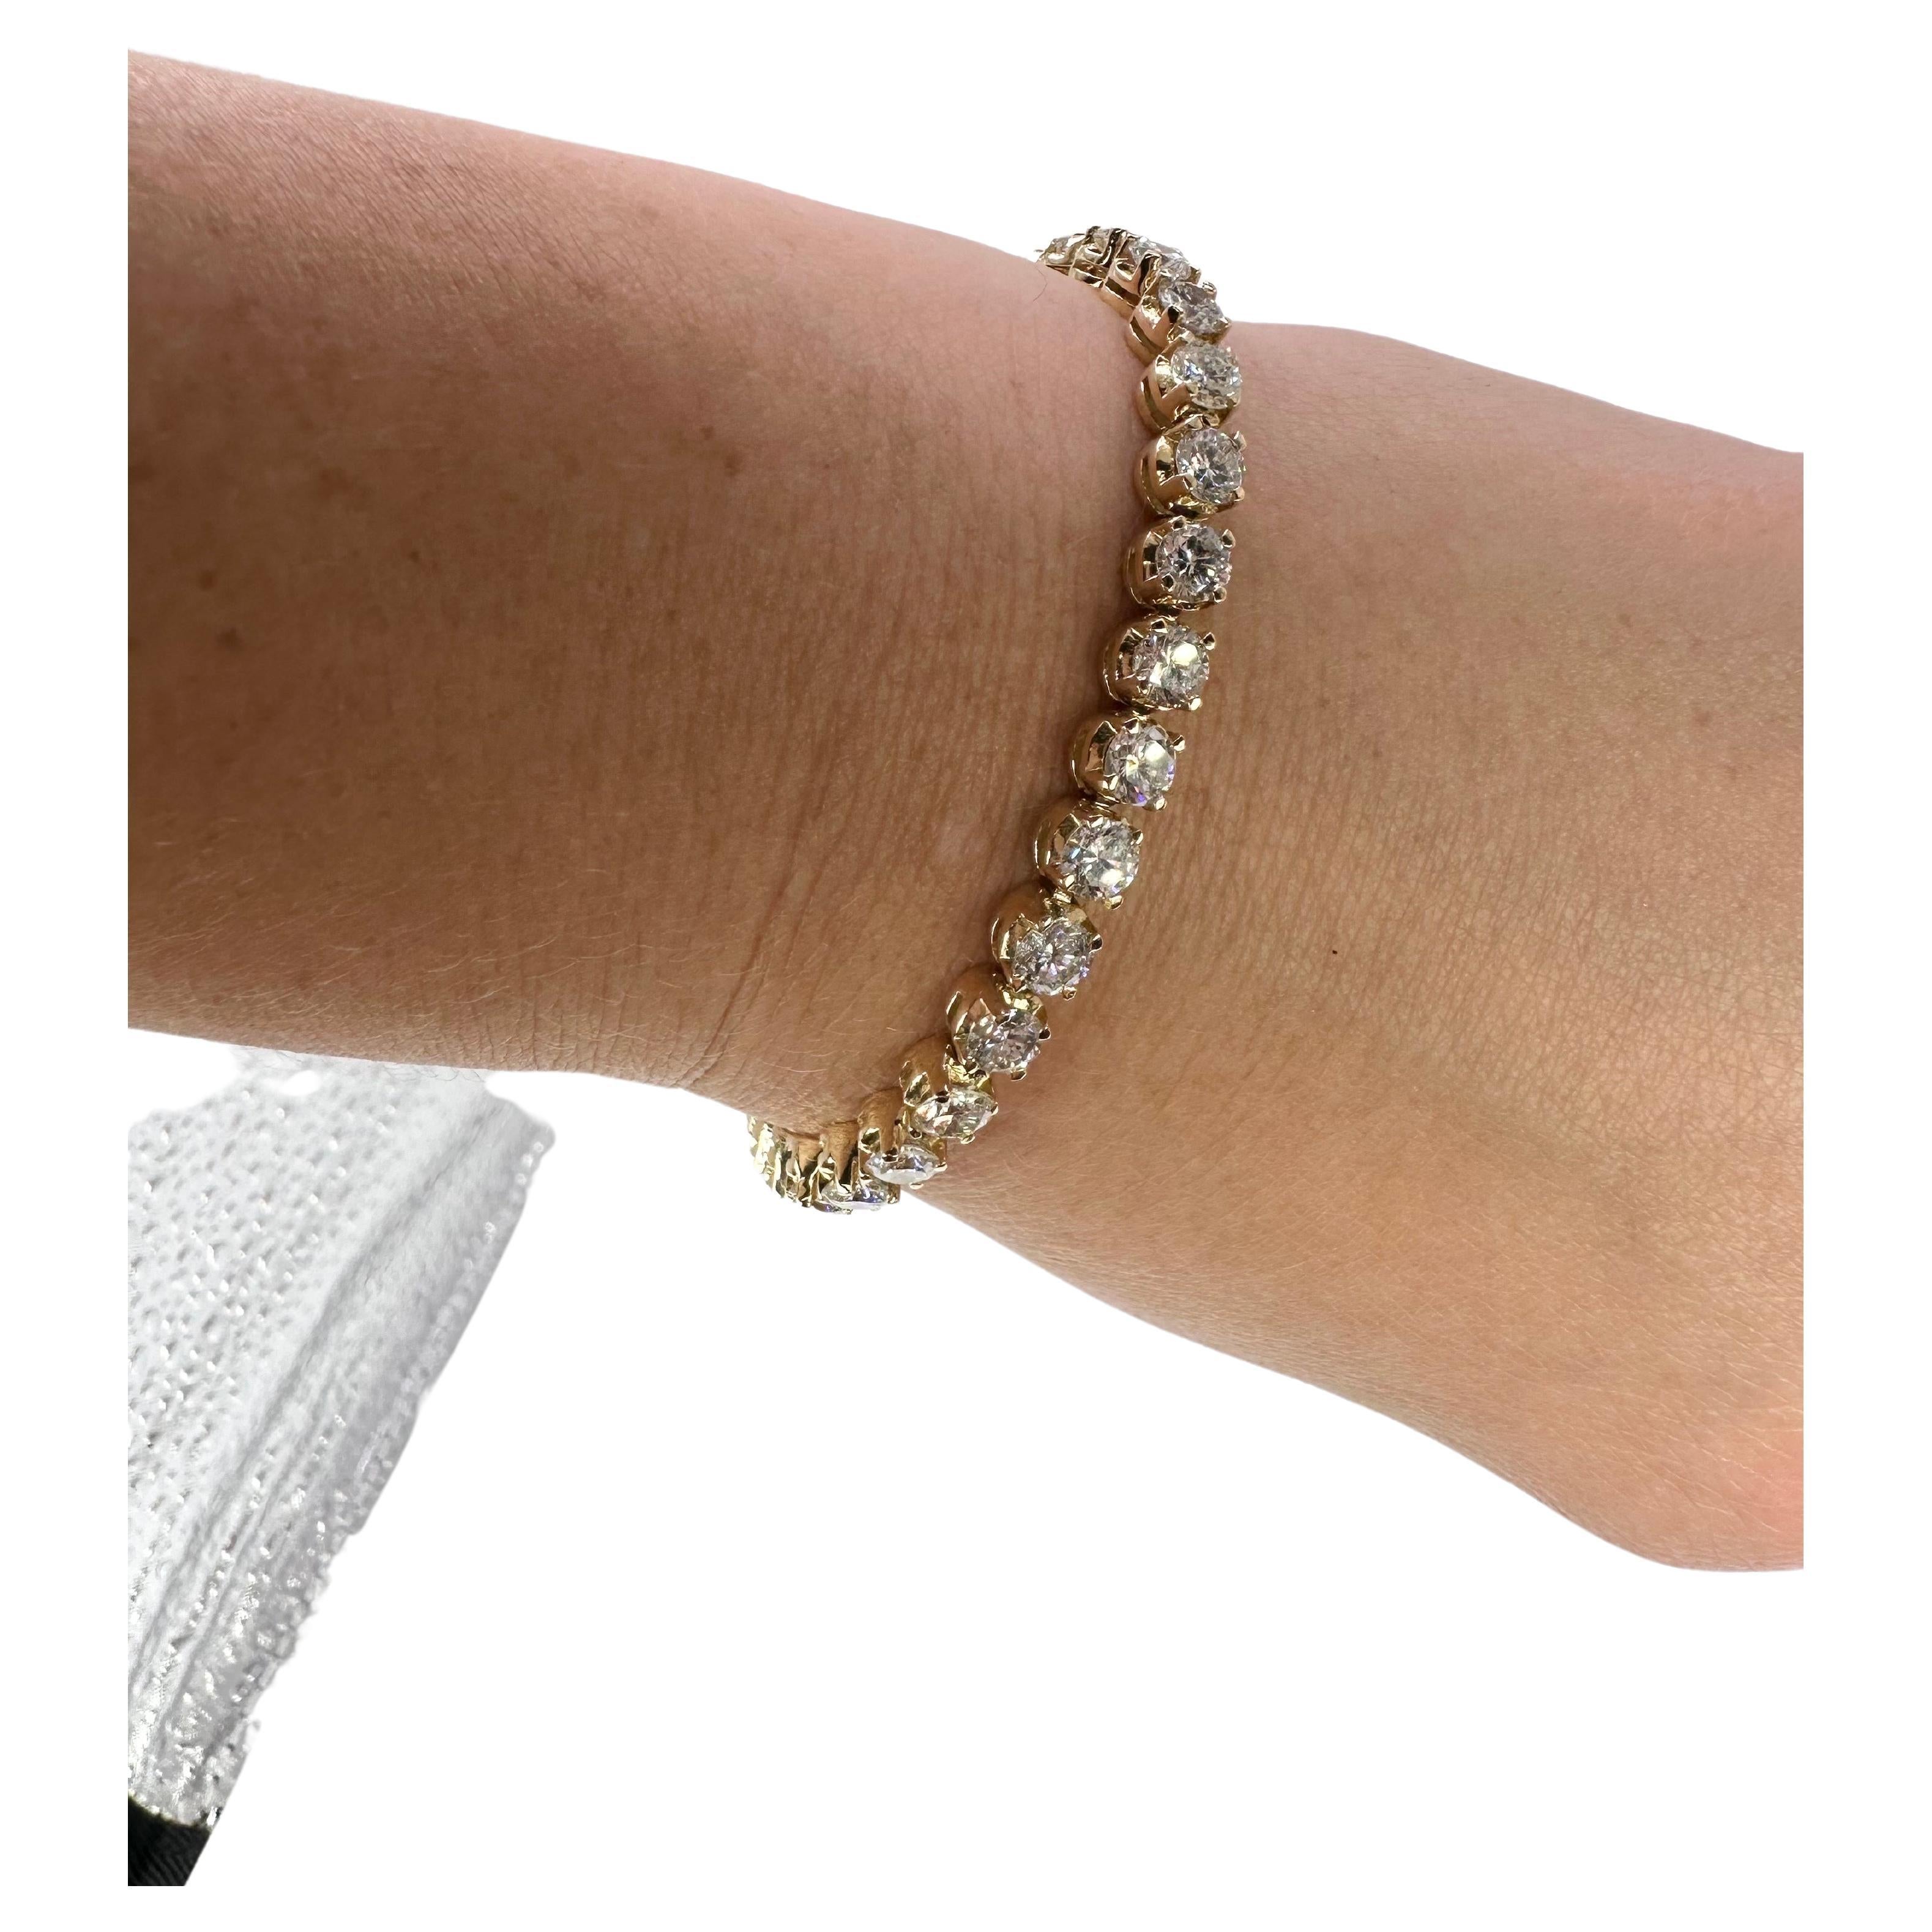 Stunning luxurious tennis bracelet in 18KT yellow gold with 9.90 carats of diamonds and astonishing sparkle!!!!!!!This bracelet will be noticed,It has this wow effect! Made in 4 prong setting with 33 diamonds.

GOLD: 18KT gold
NATURAL